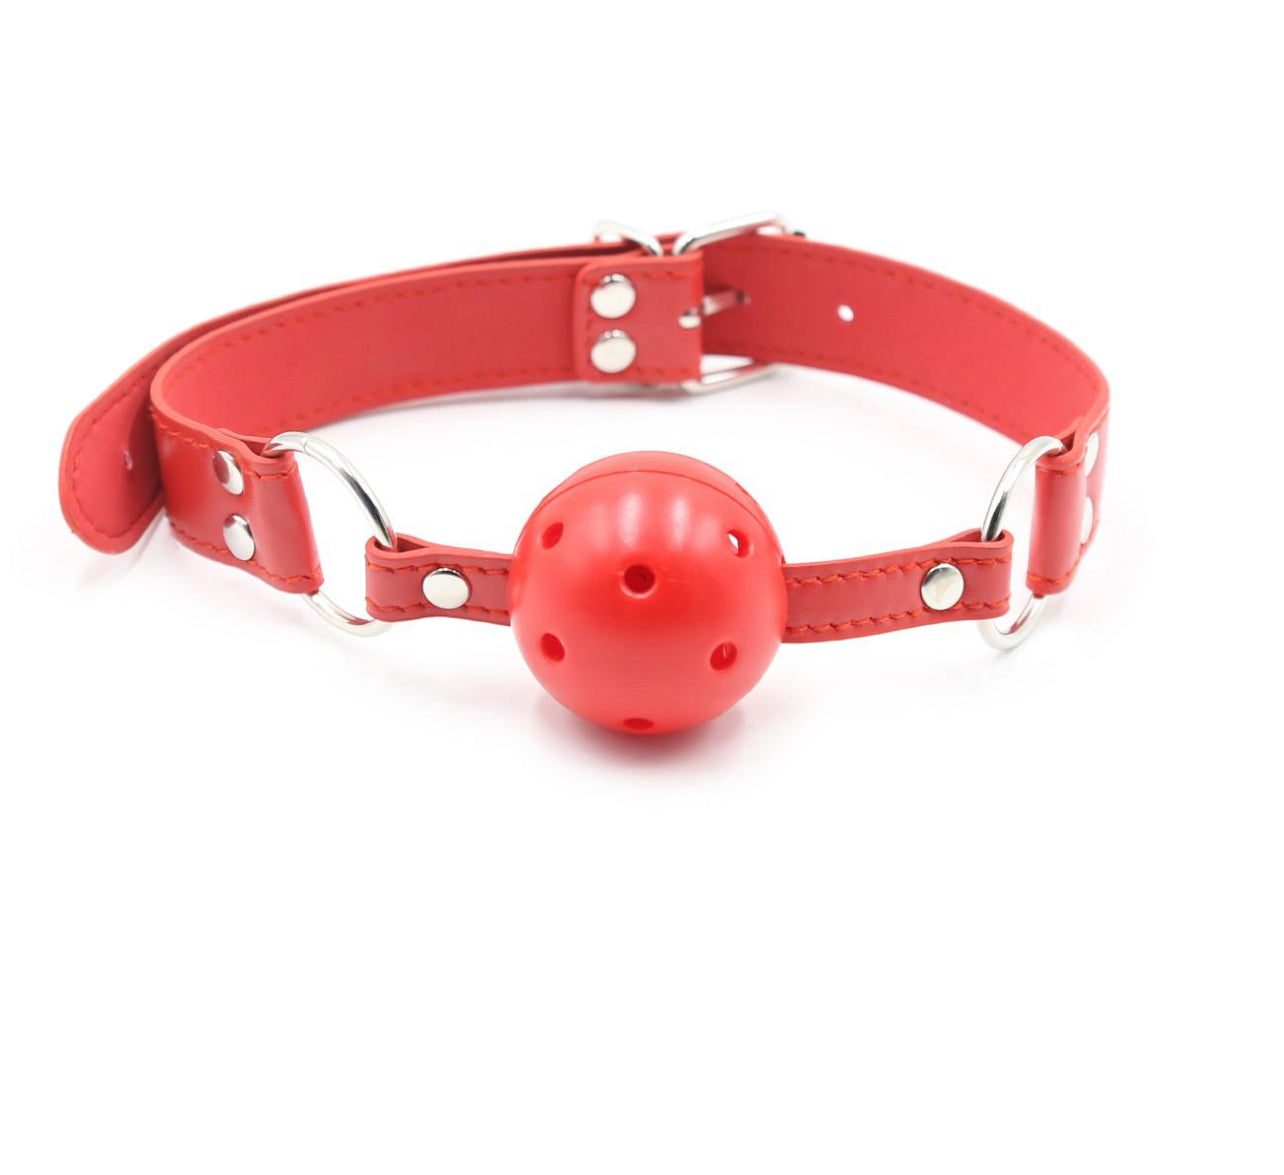  The ball is made of safe, non-toxic materials, ensuring that you can play with peace of mind. This ball gag is perfect for those who like to add some colour to their BDSM play, or for those who are looking to spice up their collection. It's also perfect for those who love the feeling of being gagged and controlled.